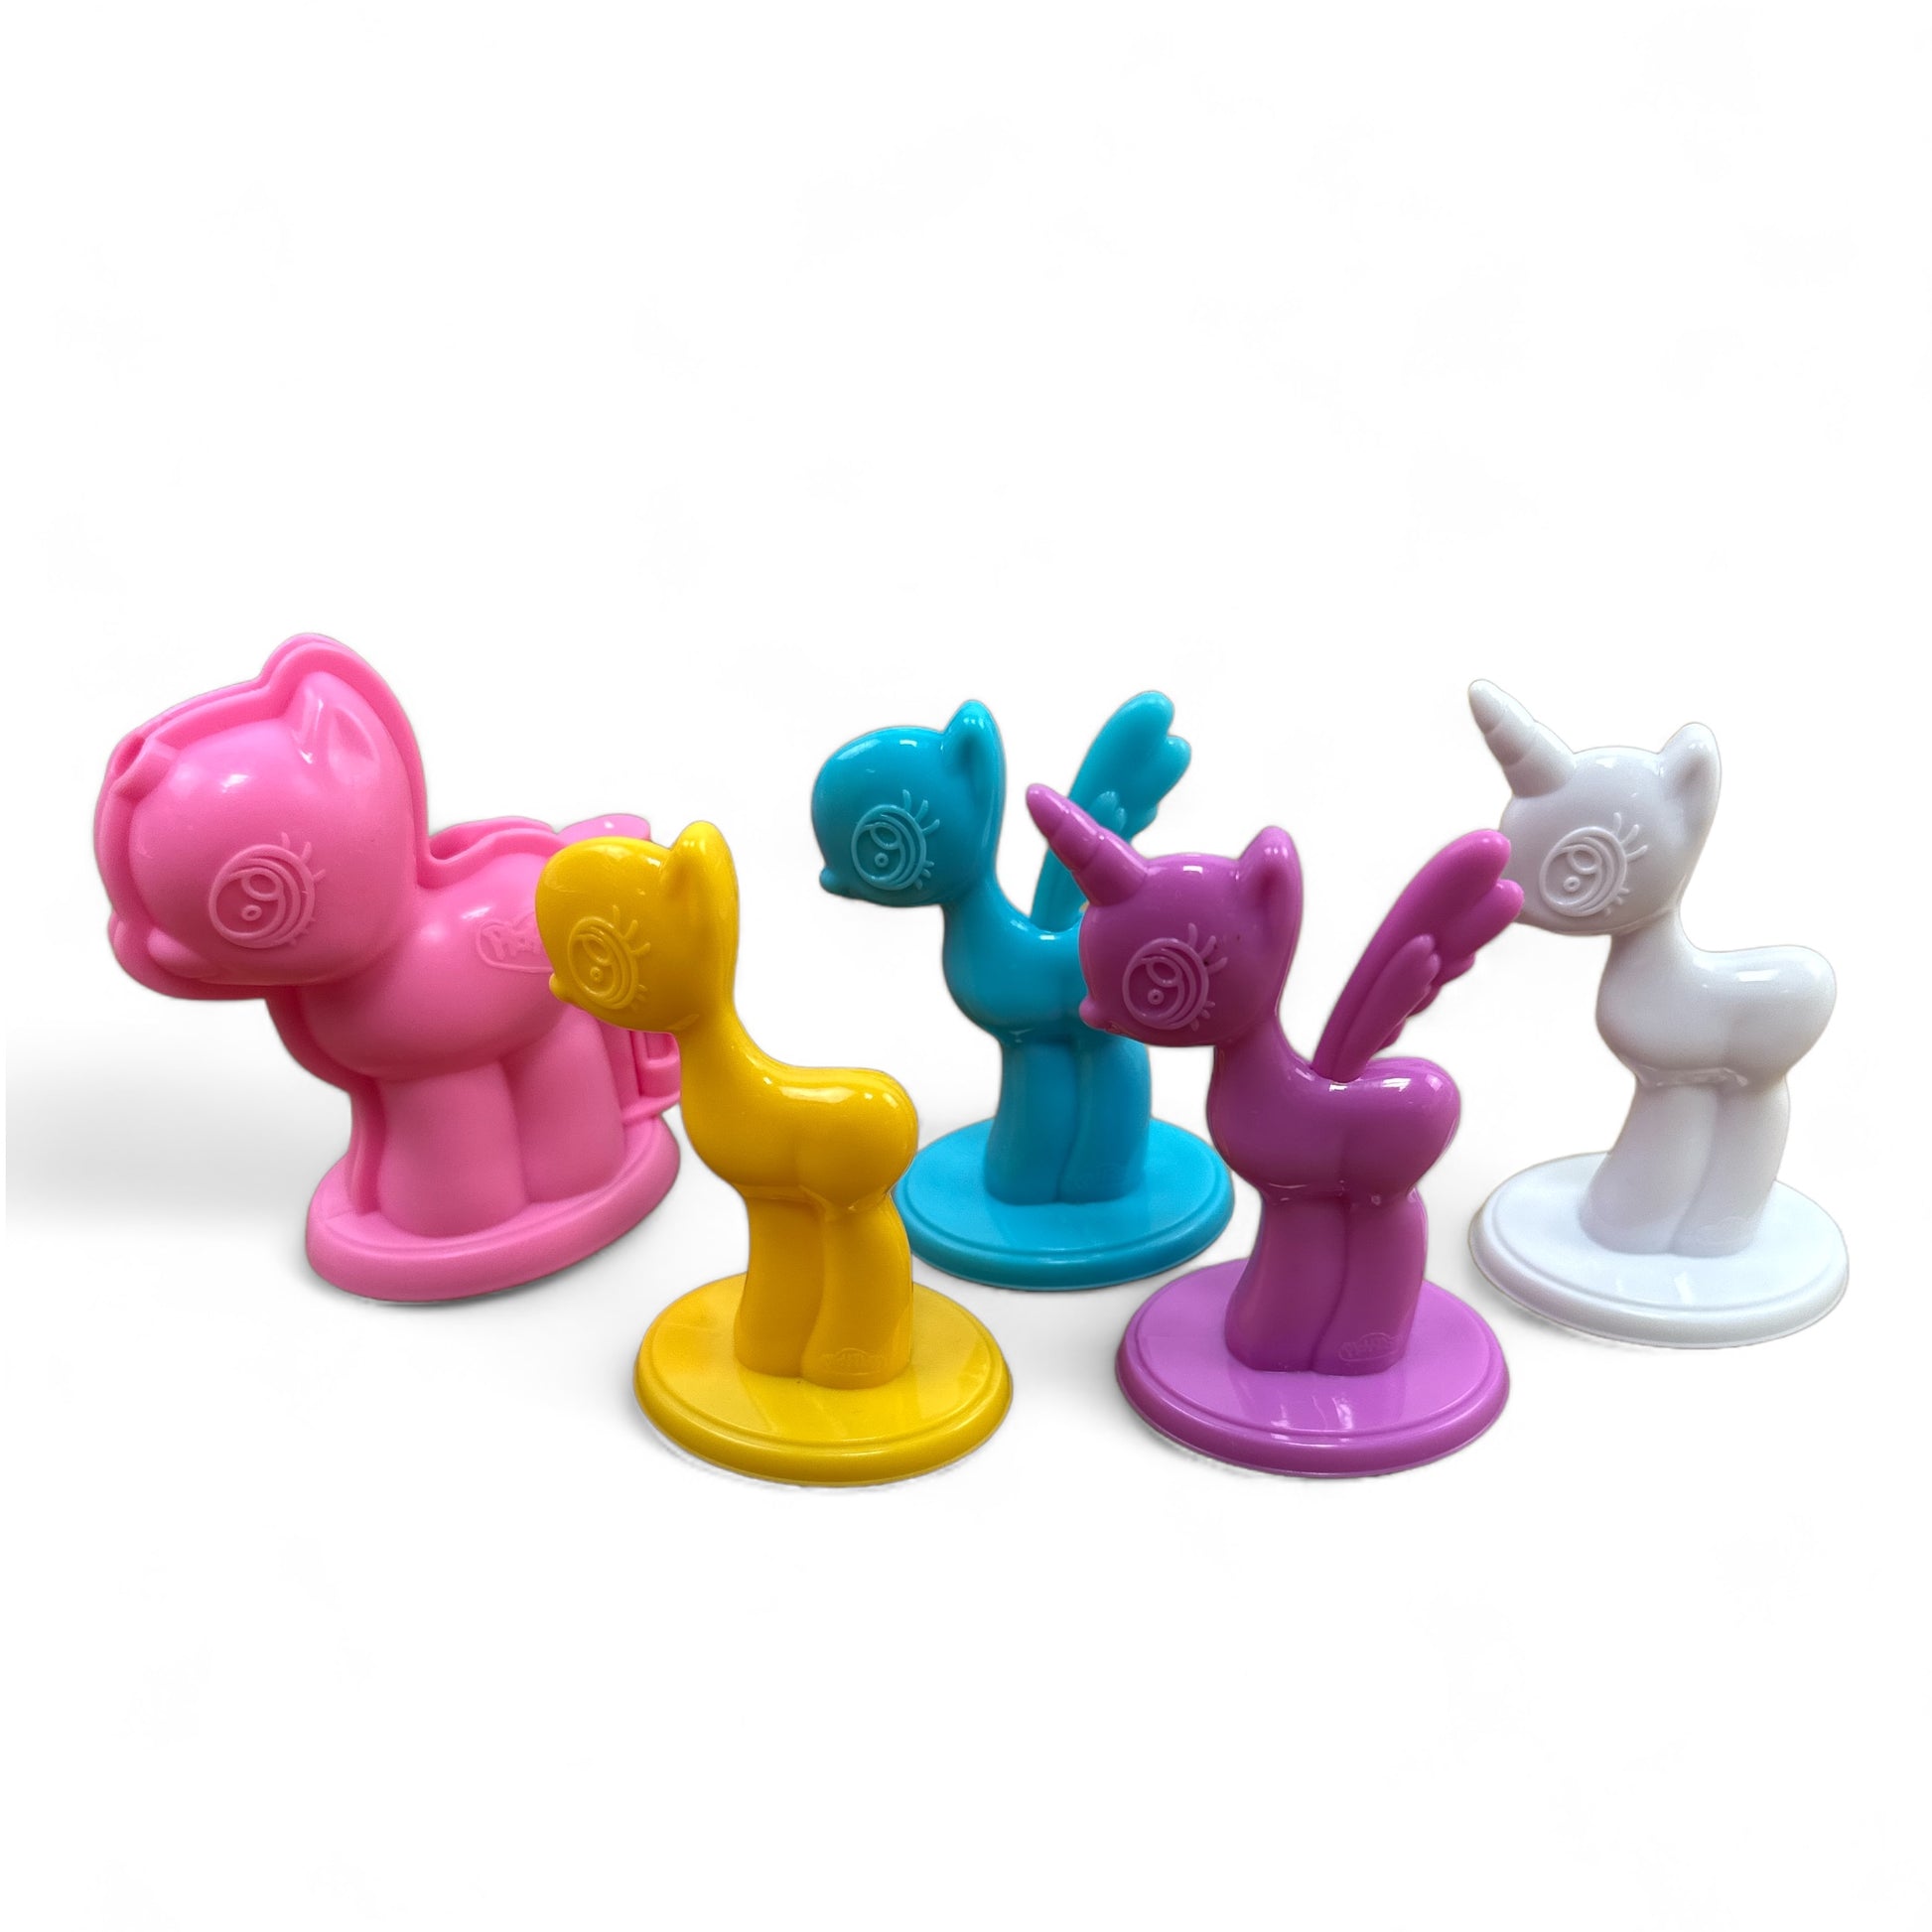 My Little Pony Play-Doh Molds